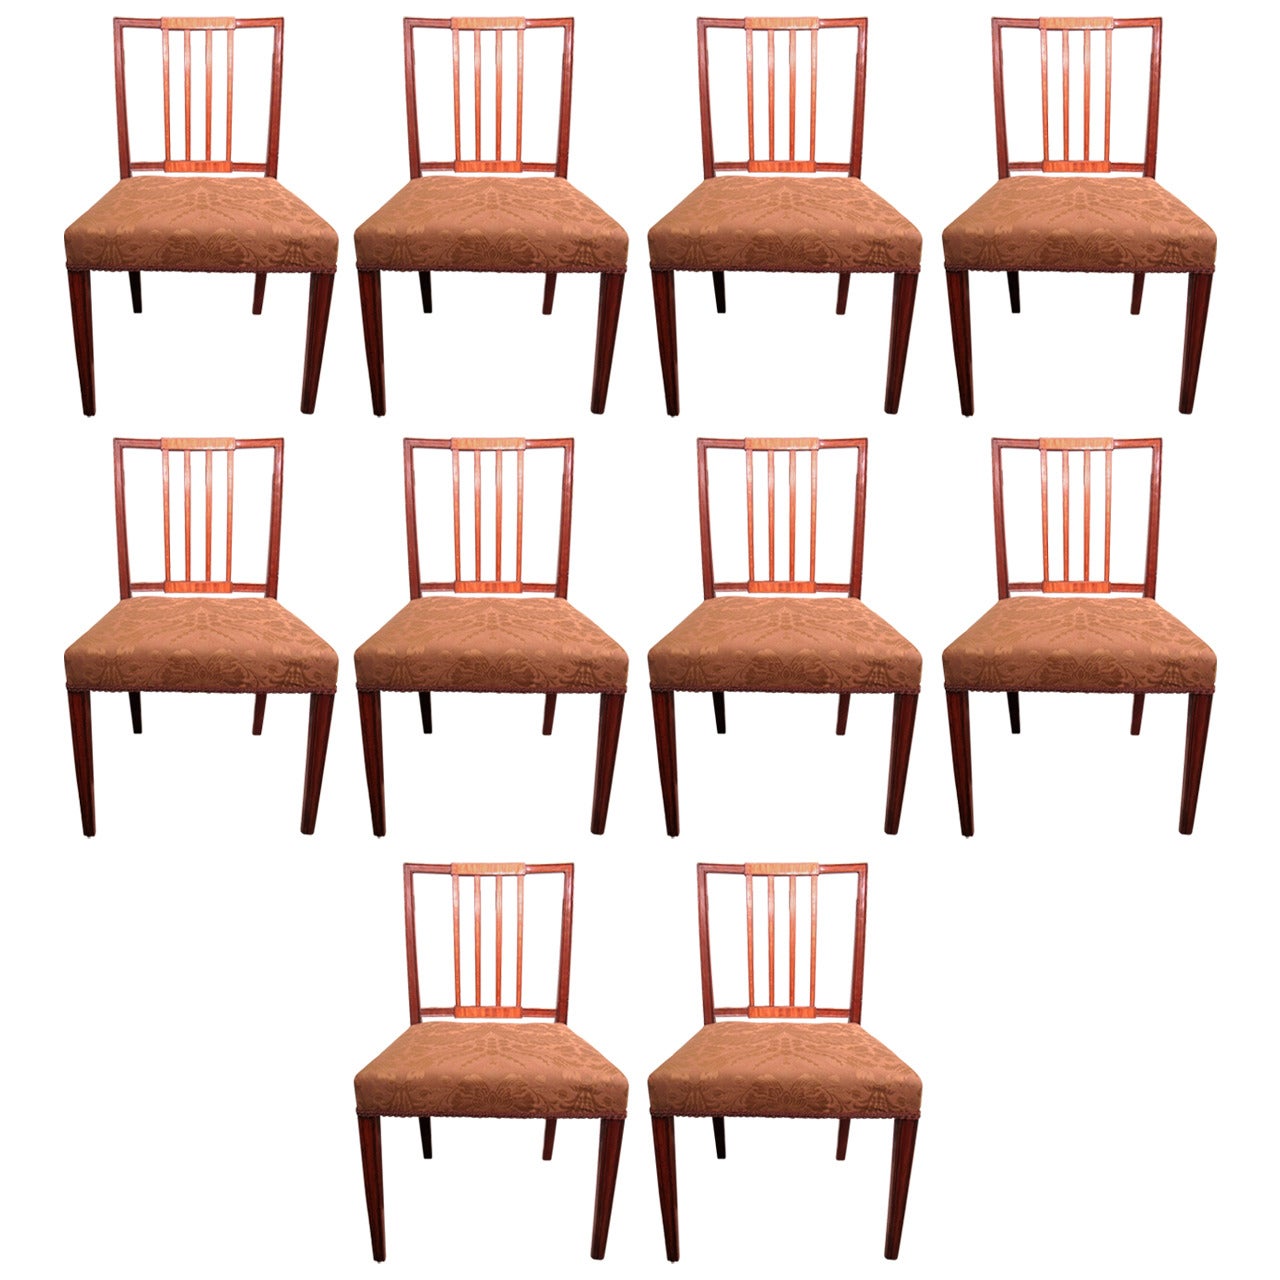 Set of Ten George III Dining Chairs in Mahogany and Satinwood, Late 18th Century For Sale